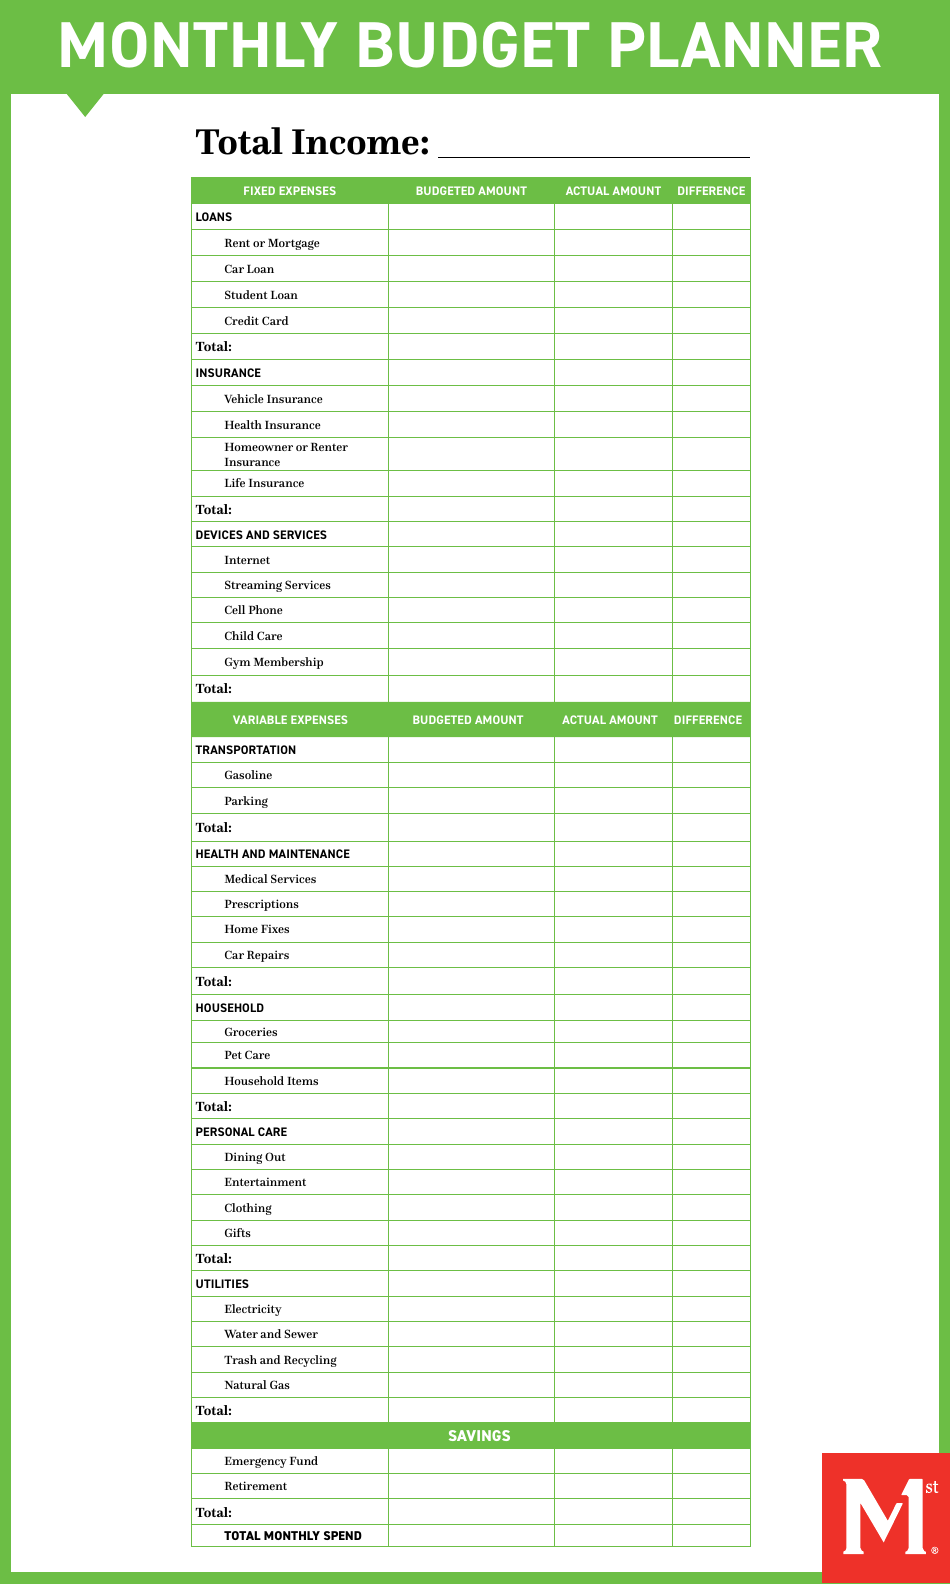 Monthly Budget Planner Template - Green